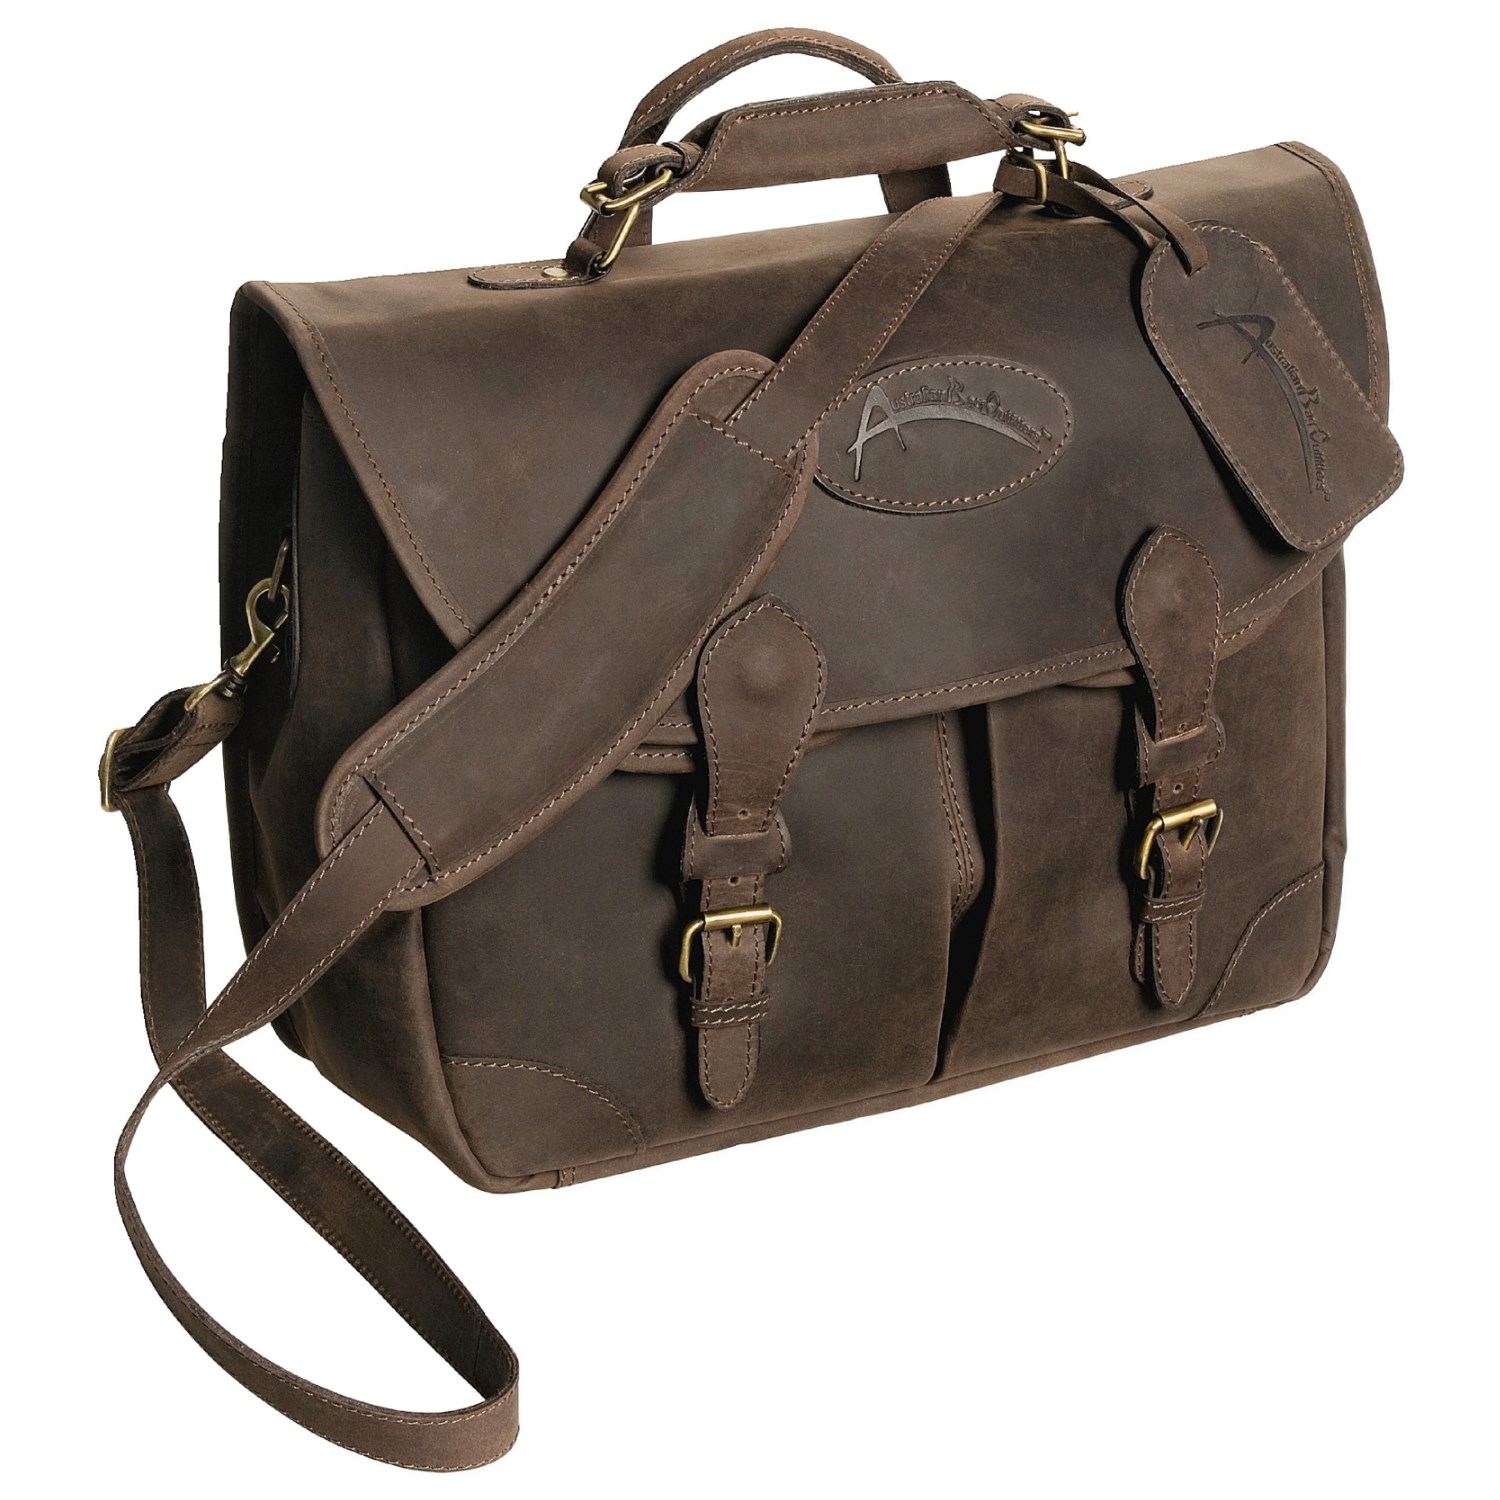 Australian Bag Outfitters Bushman Business Bag - Waxed Leather 1105D - Save 39%